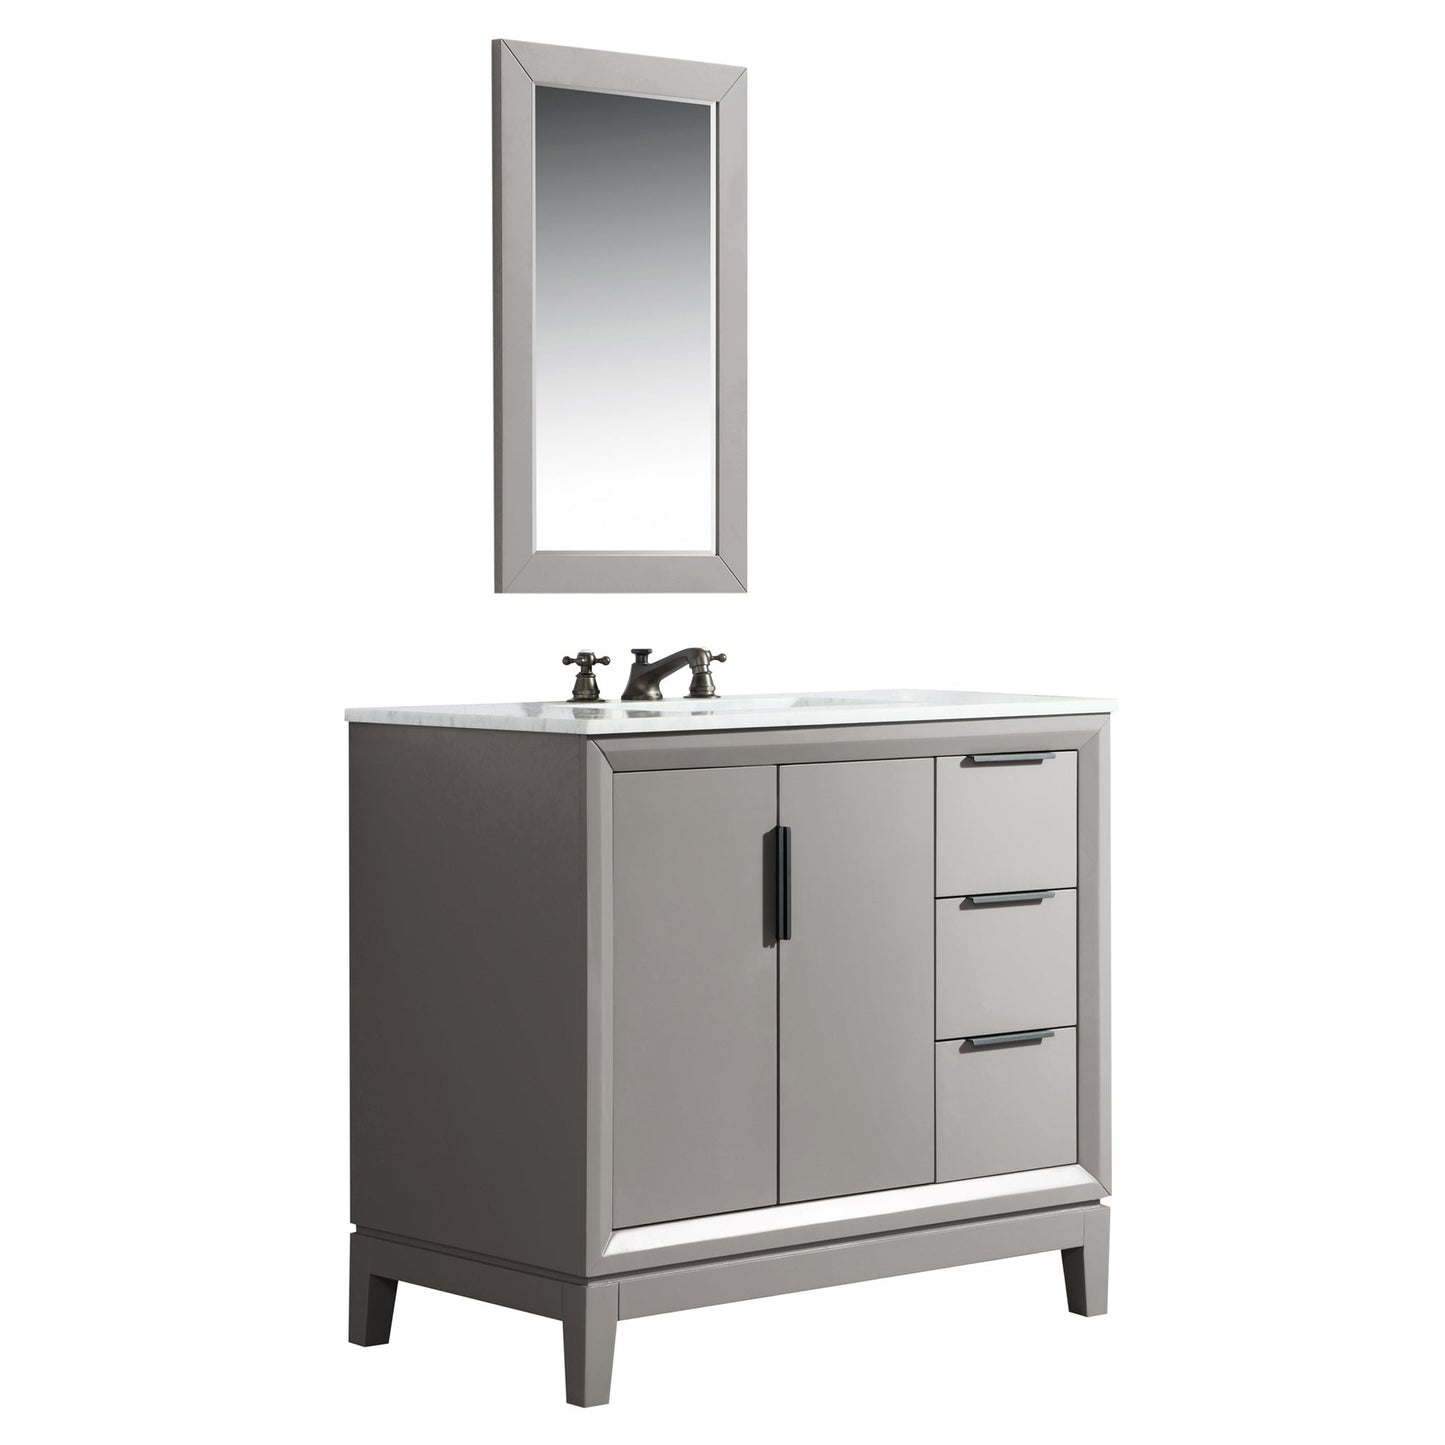 Water Creation Elizabeth 36" Single Sink Carrara White Marble Vanity In Cashmere Grey With Matching Mirror